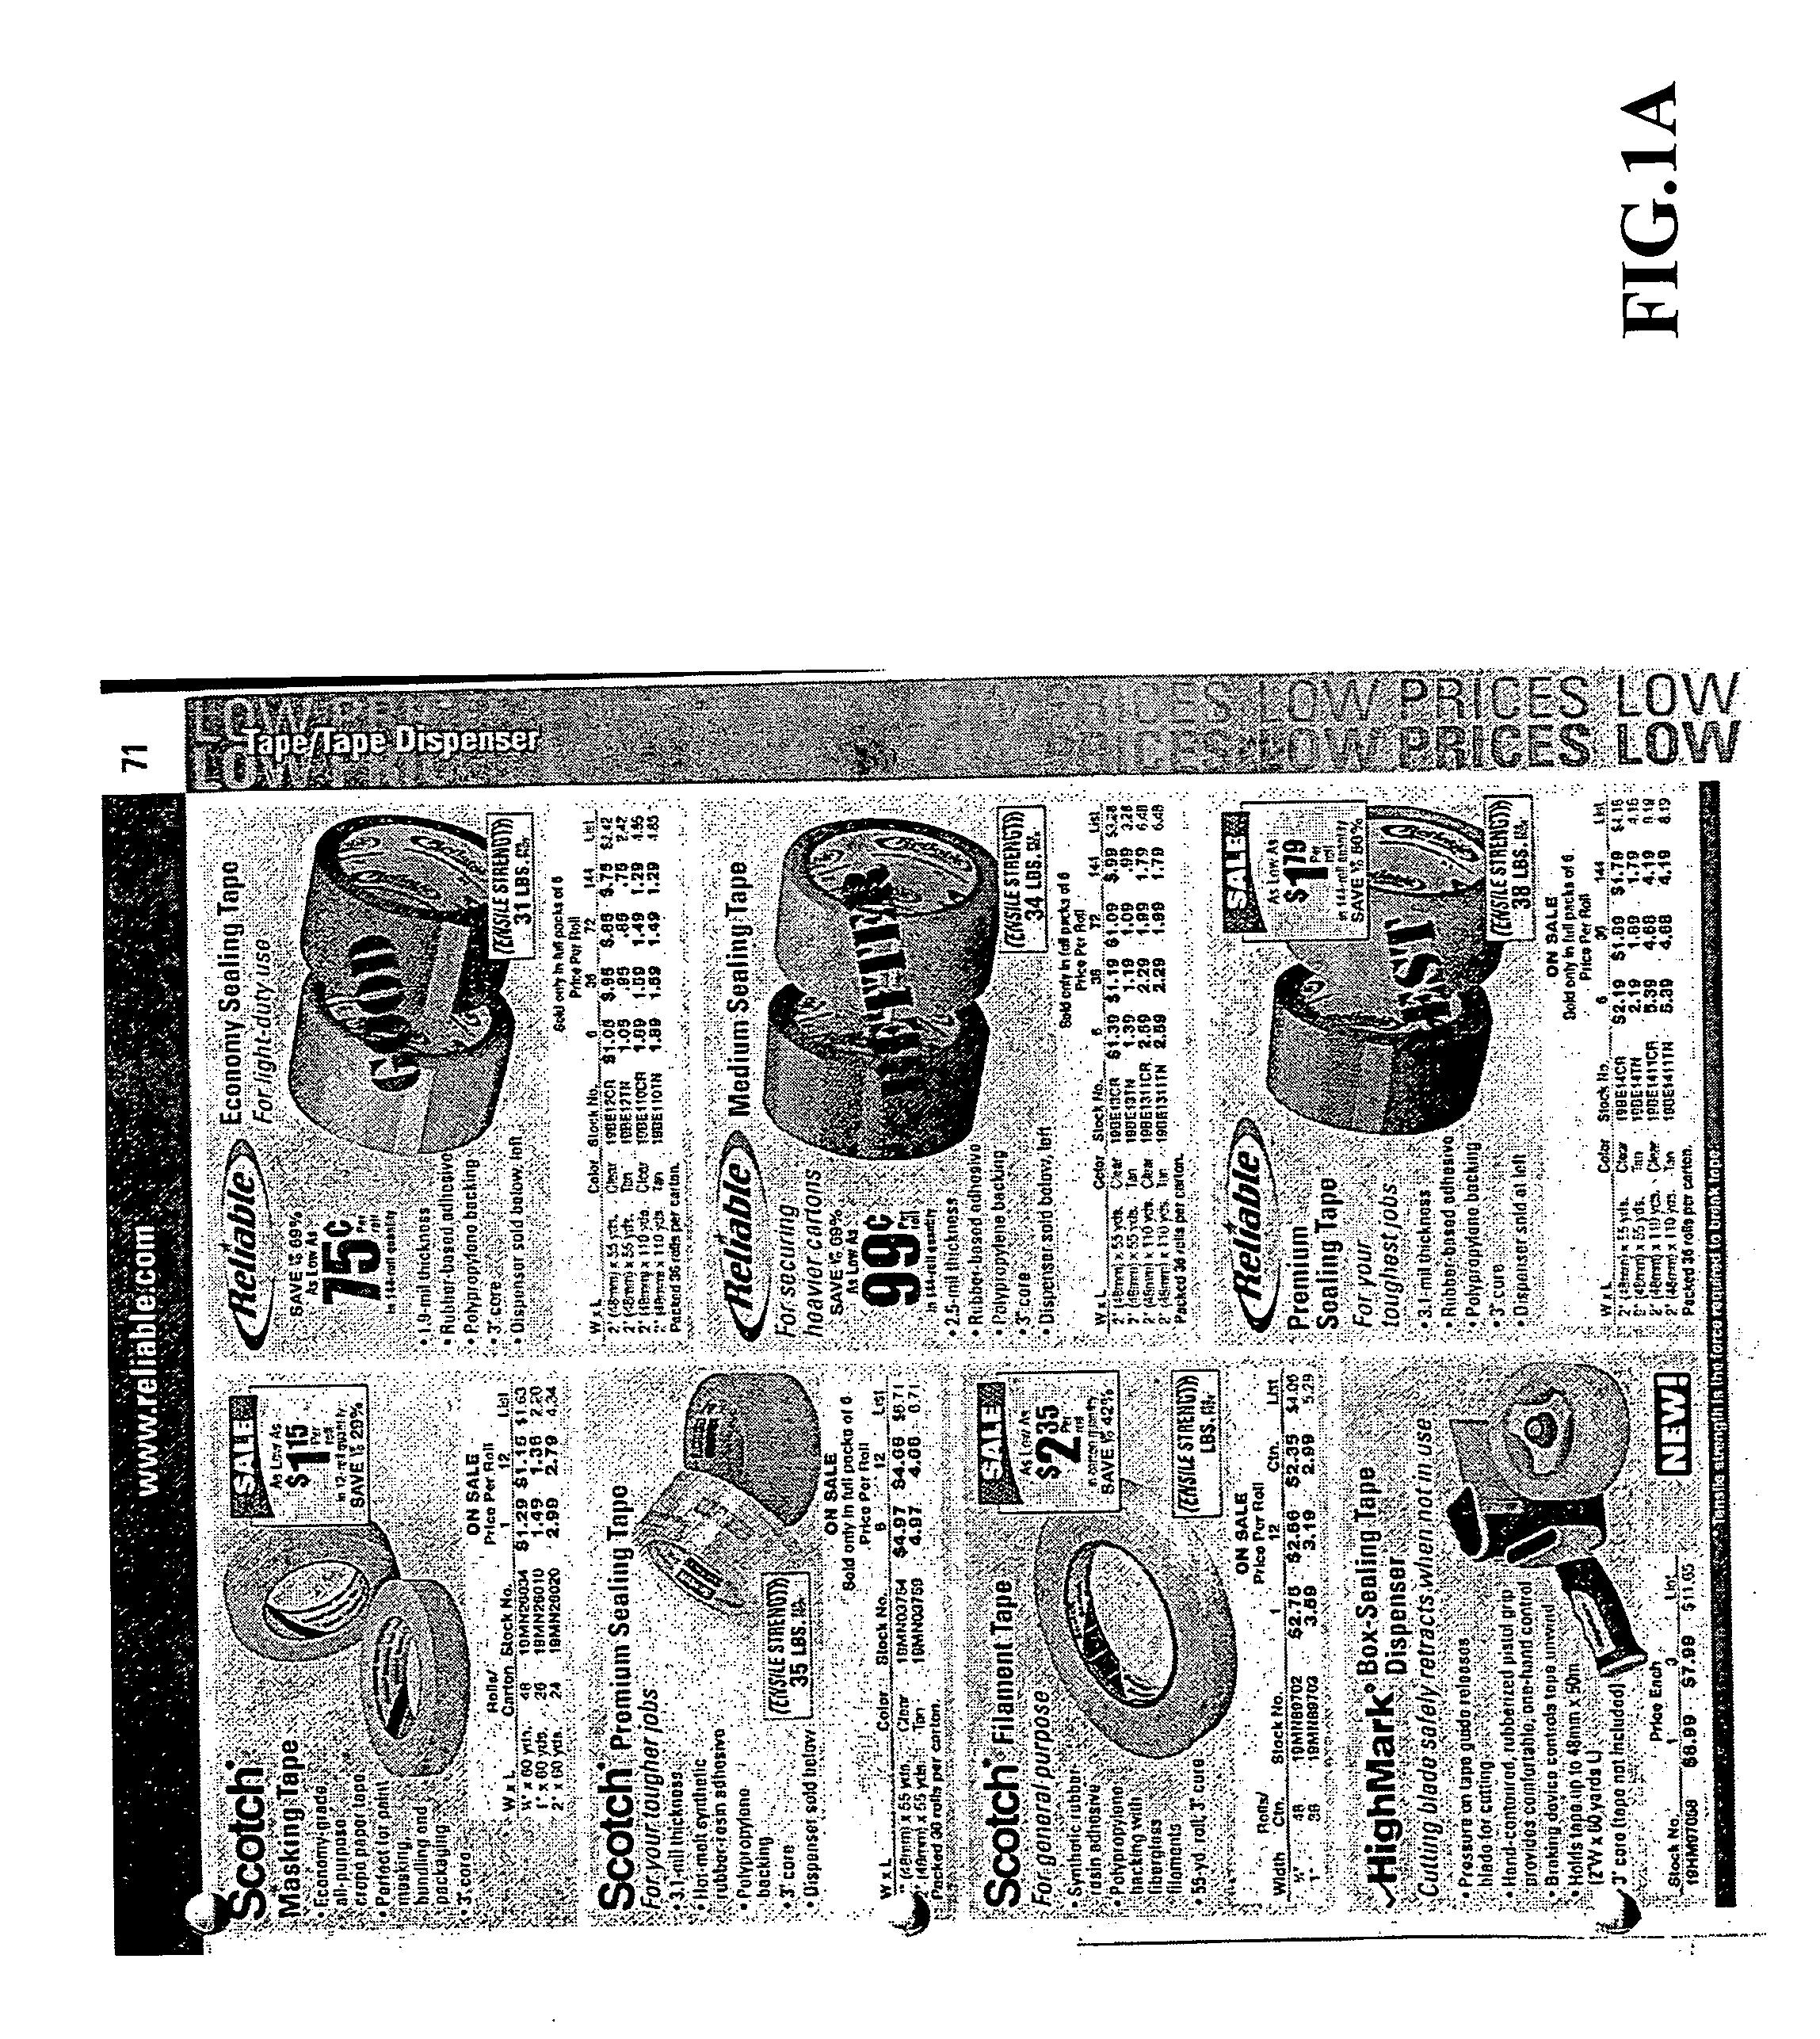 Method, system and computer readable code for automatic reize of product oriented advertisements